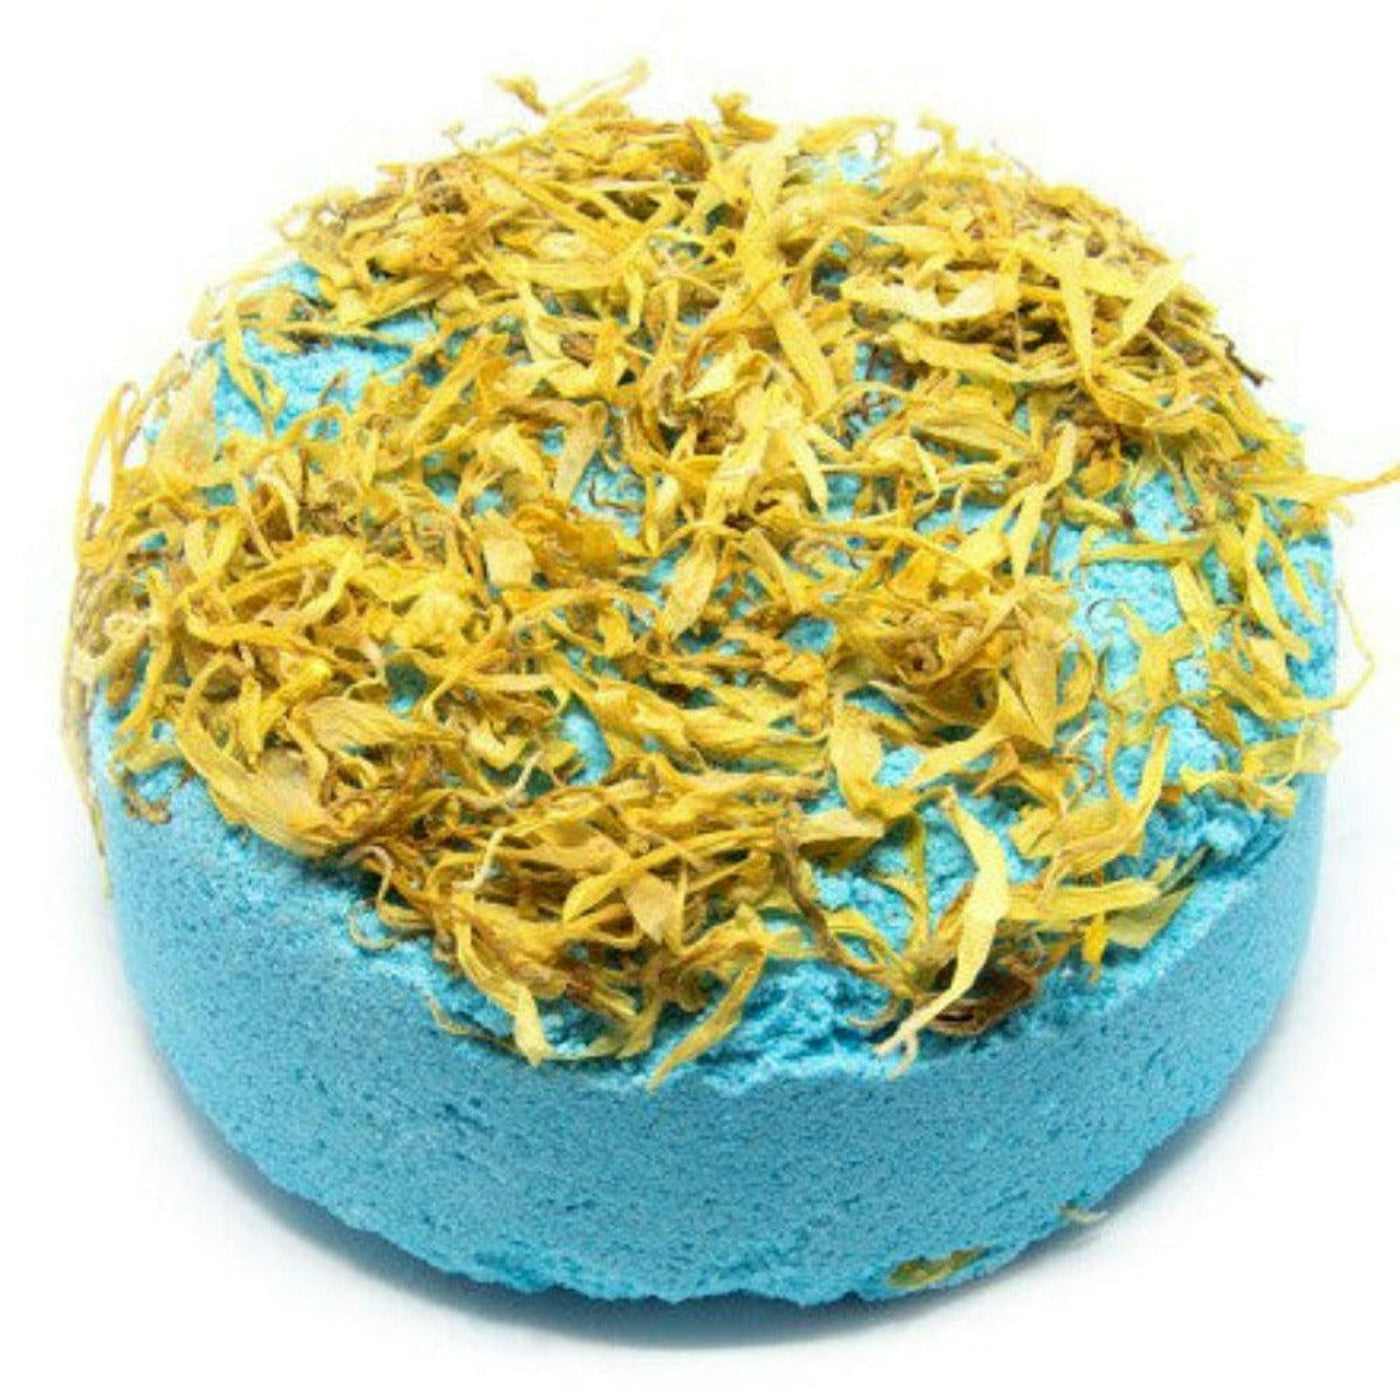 200g Floral Bath Fizz Chamomile And Clary Sage - Dream in Blue.